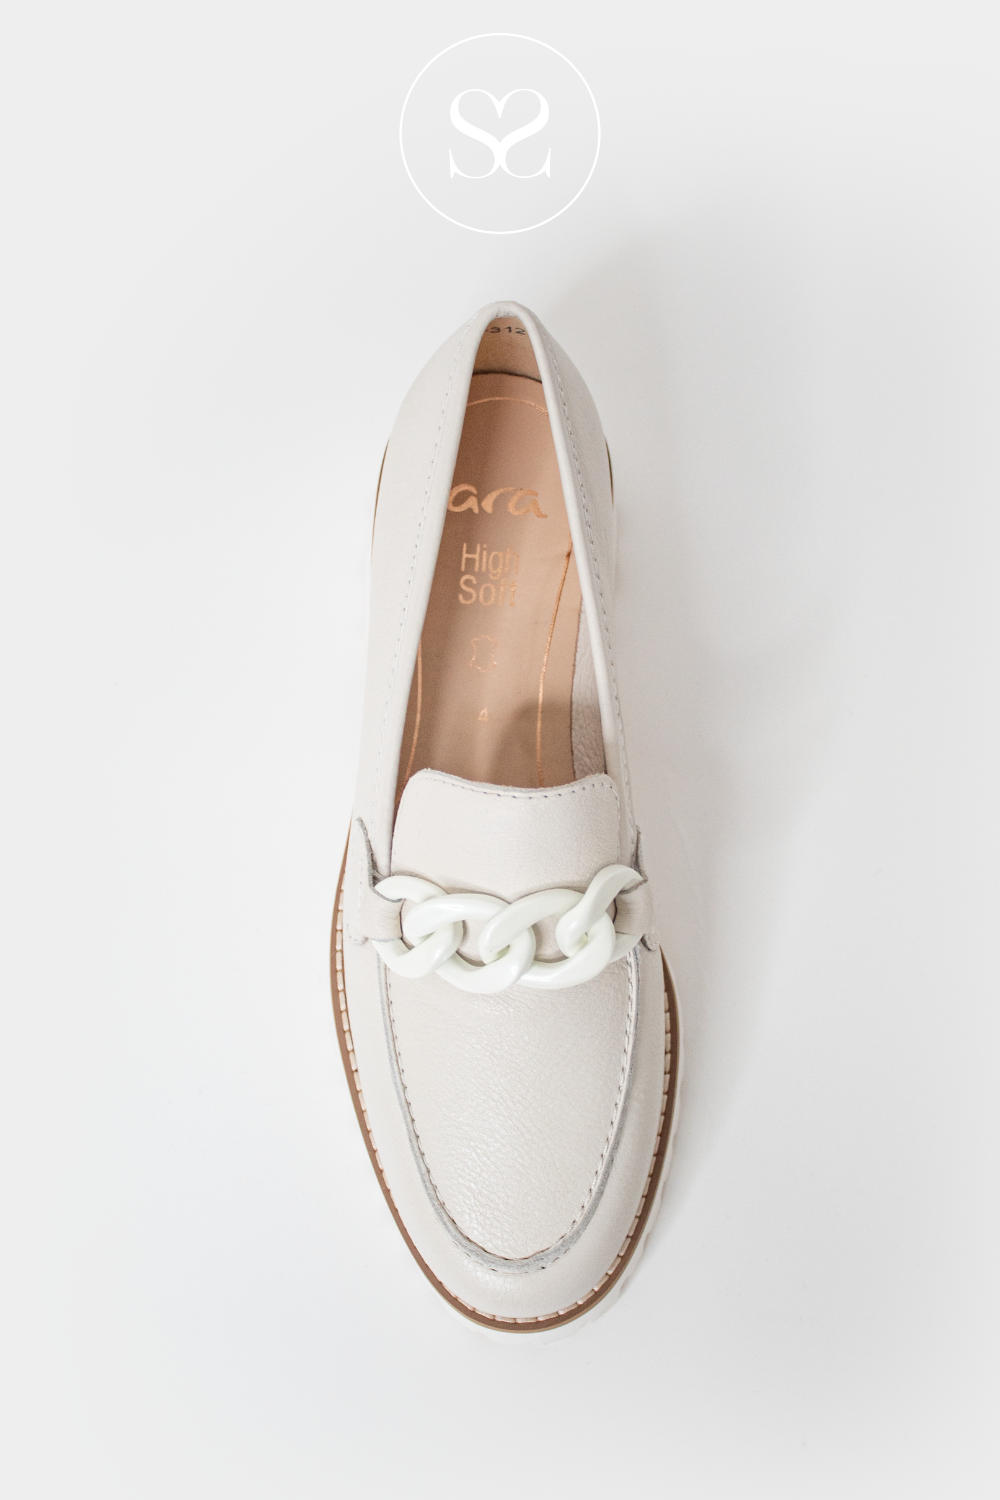 ARA 12-31209 IVORY CHUNKY LOAFERS WITH CHAIN DETAIL AND TEETH SOLE. SLIP ON STYLE